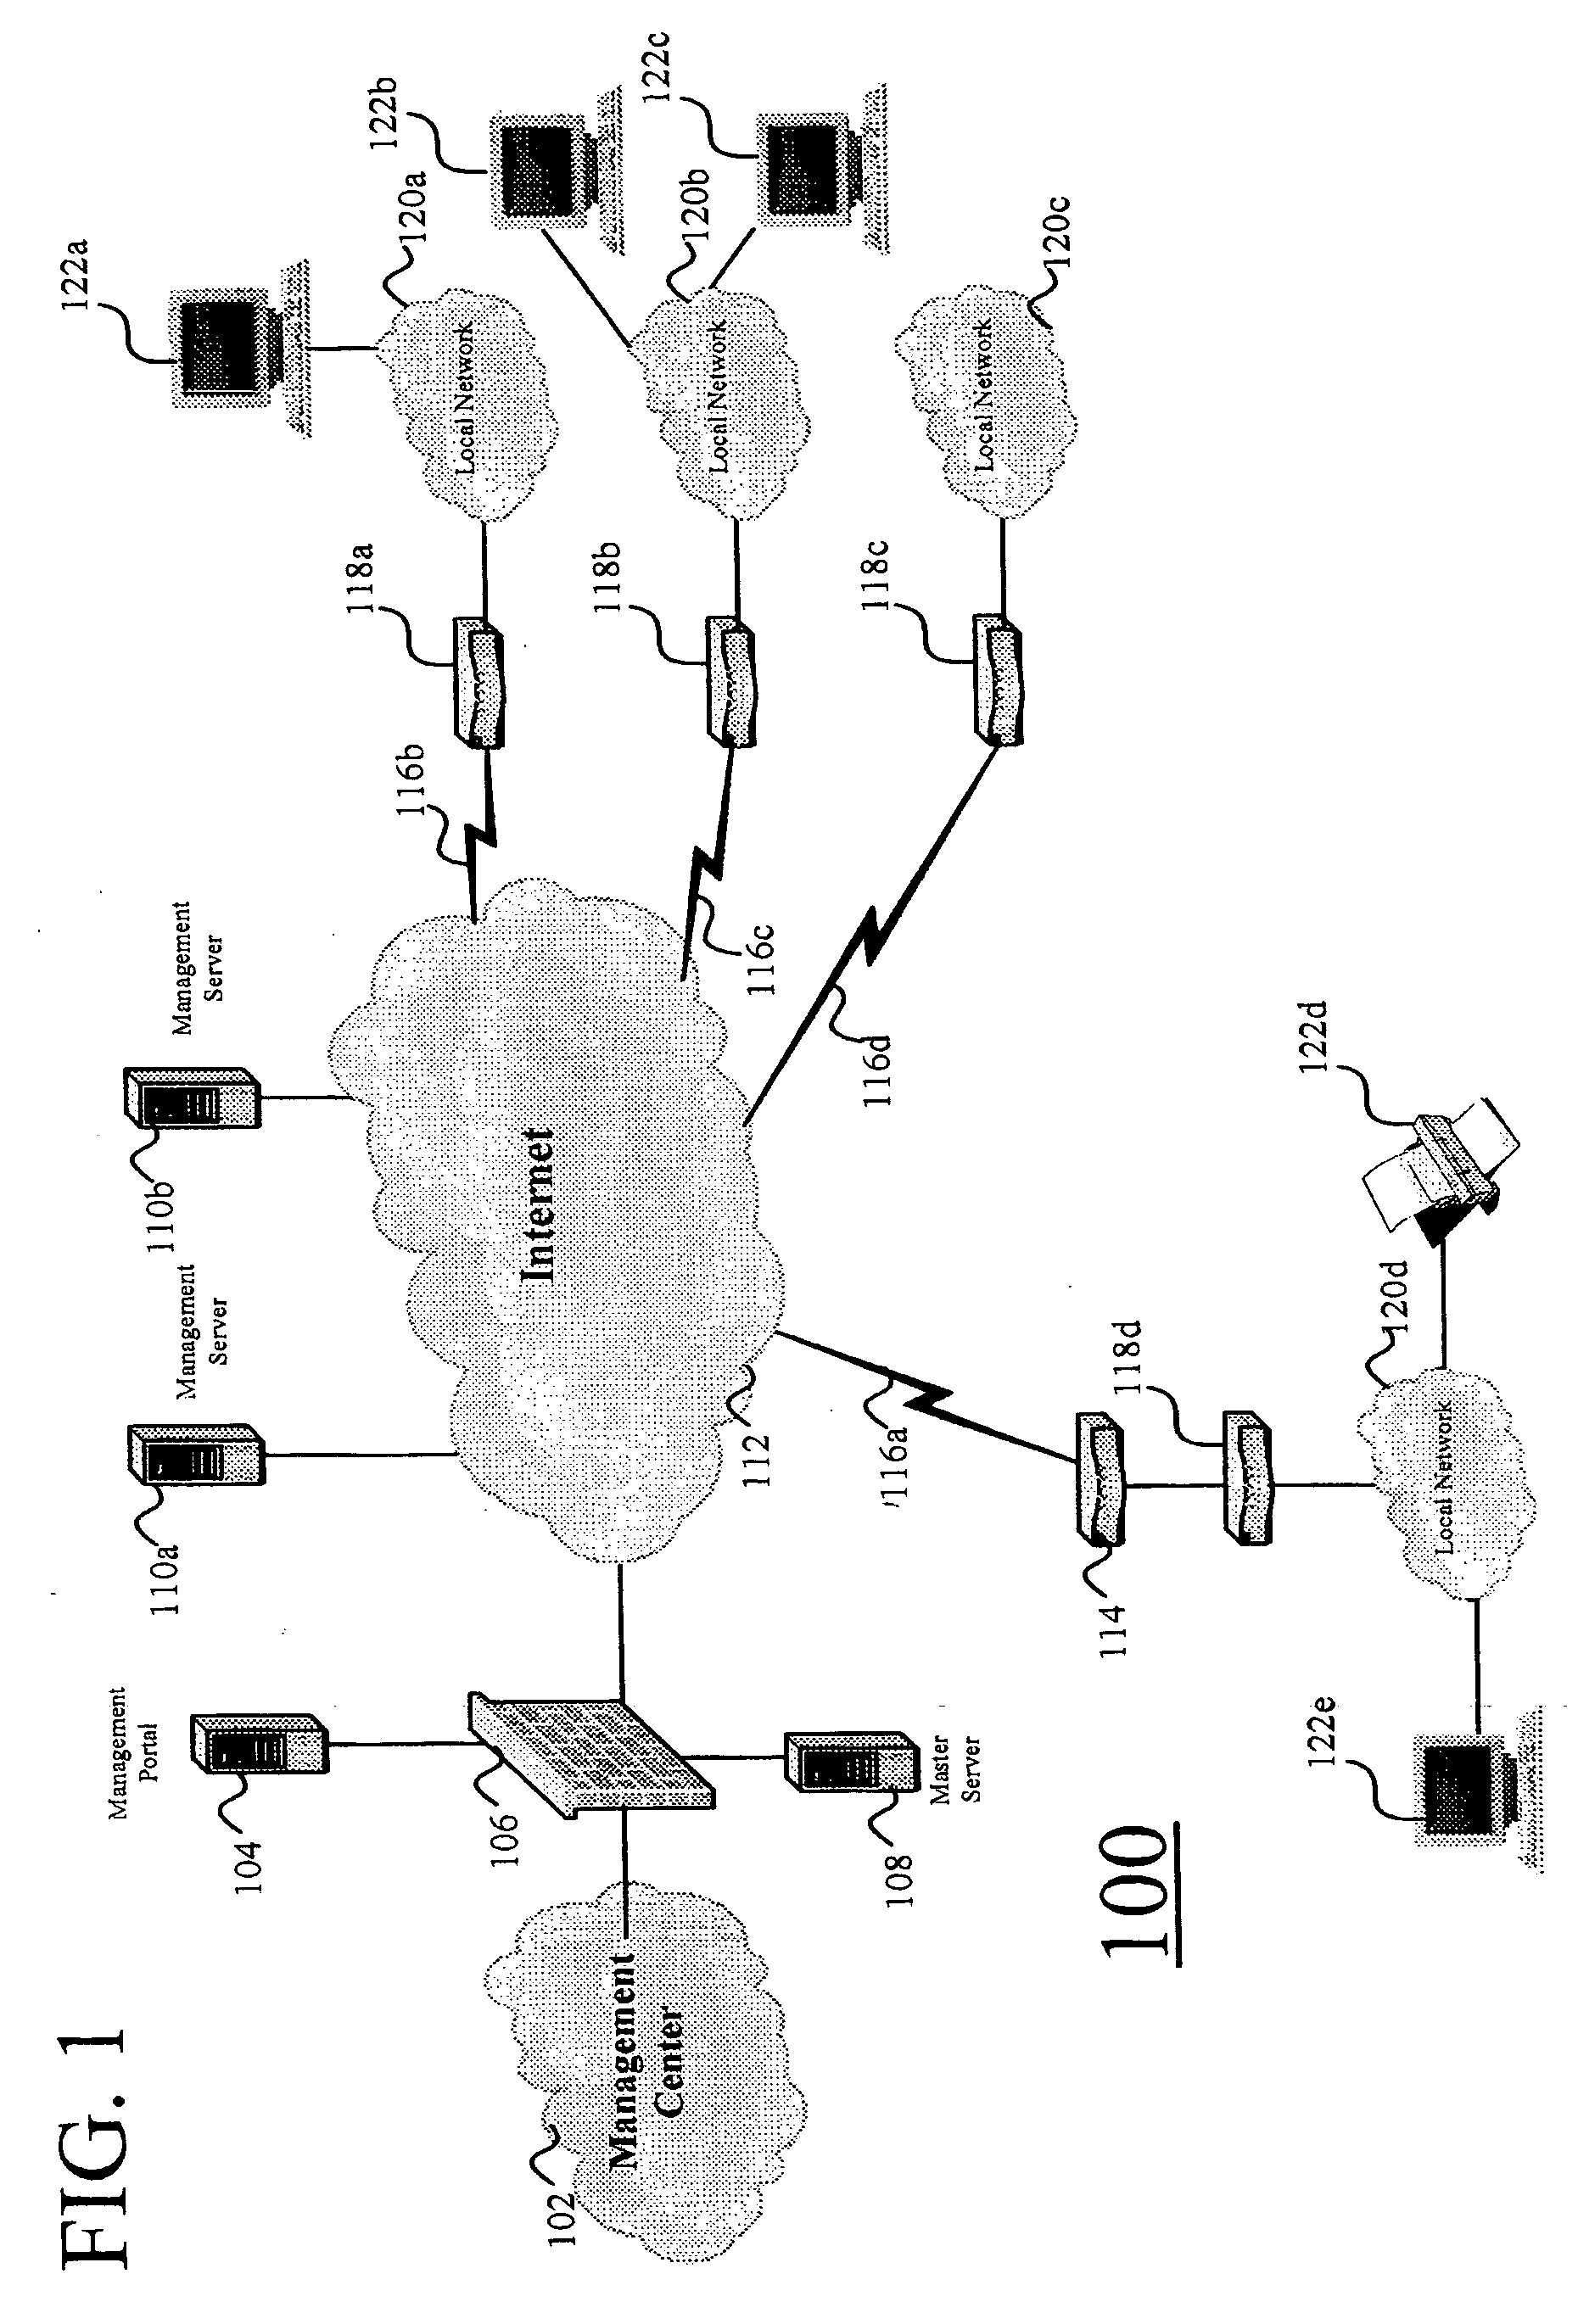 Systems and methods for automatically configuring and managing network devices and virtual private networks